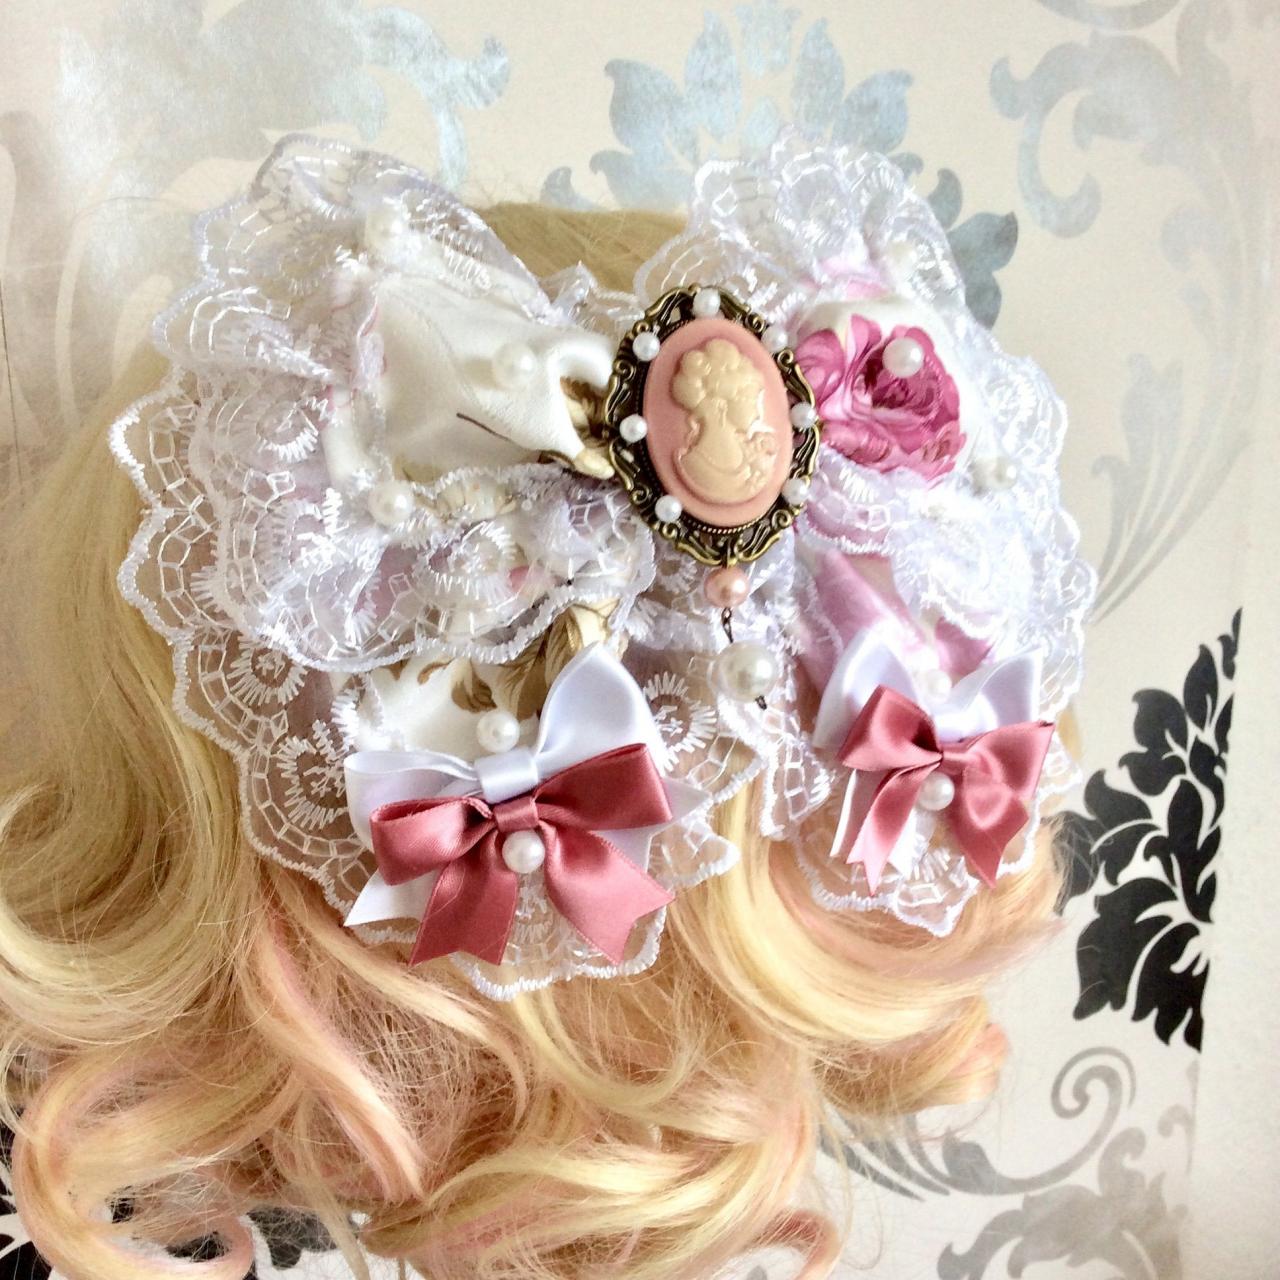 Beautiful Classic Lolita Hair Bow Sweetheart Tulle Lace Lace Roses Print Beaded Cameo Cabochon Resin Vintage Rockabilly Kawaii Wedding Sweet